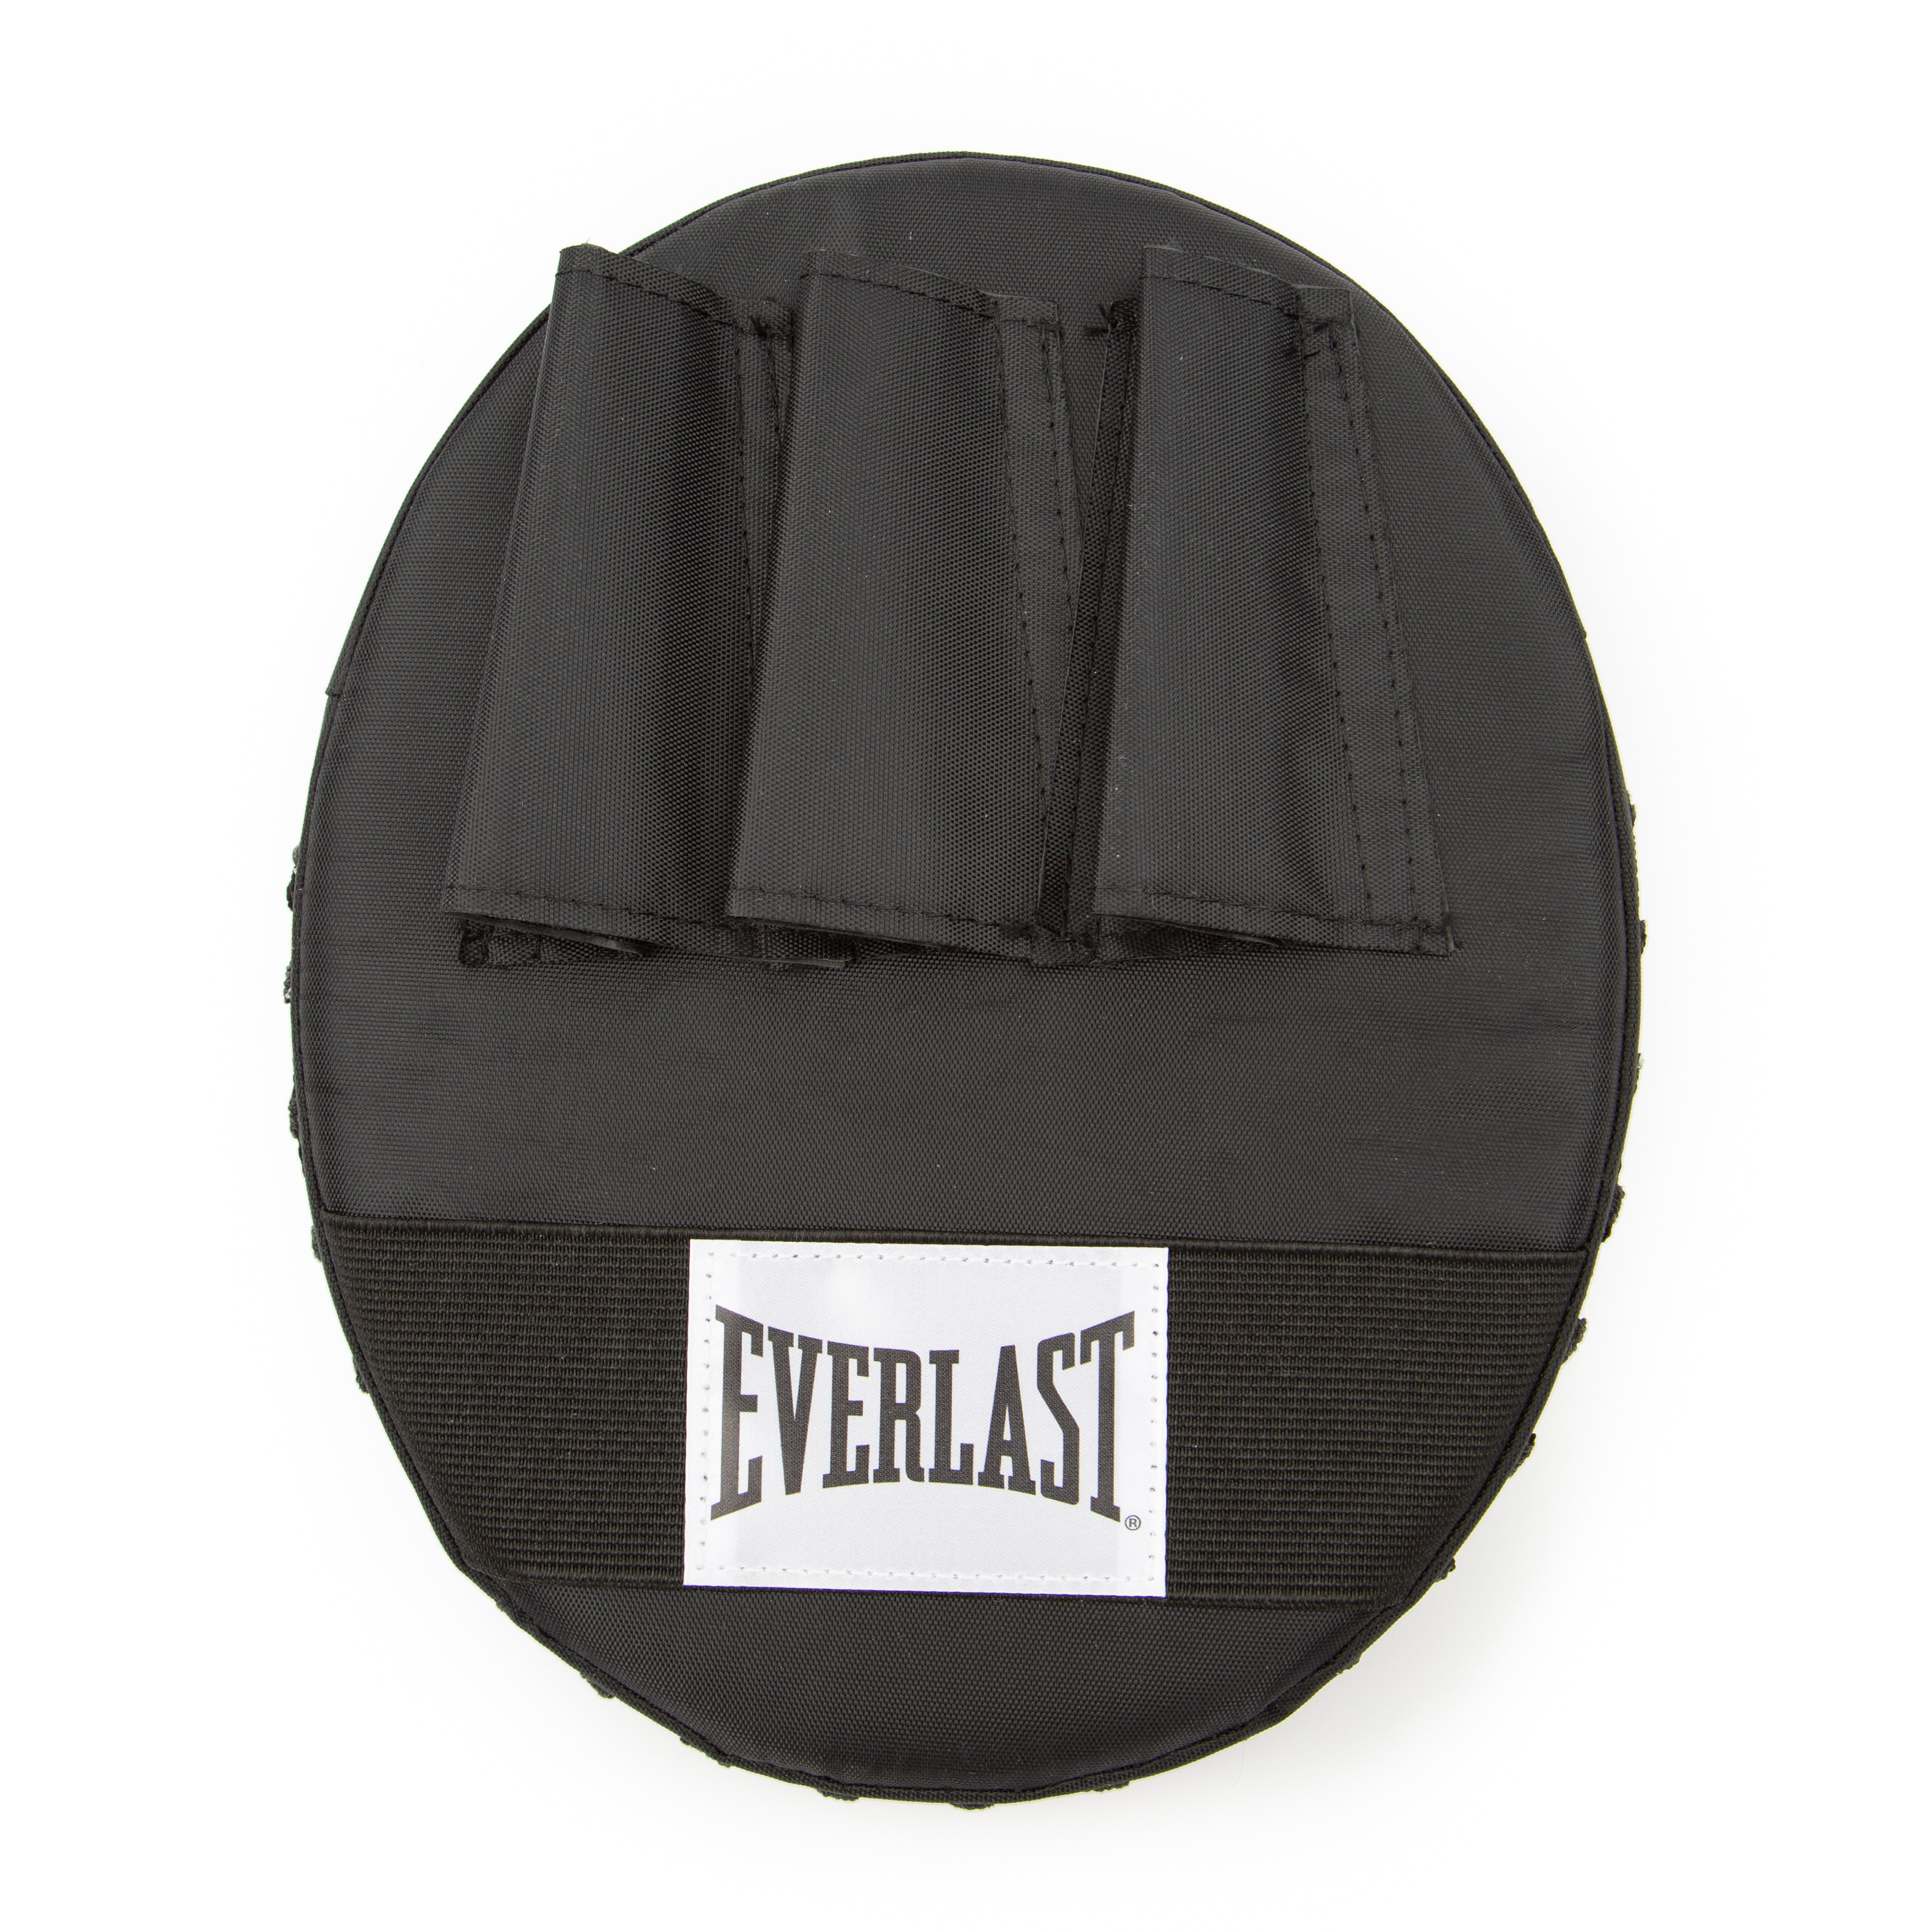 Everlast Punch Mitts Red/Black - image 3 of 7